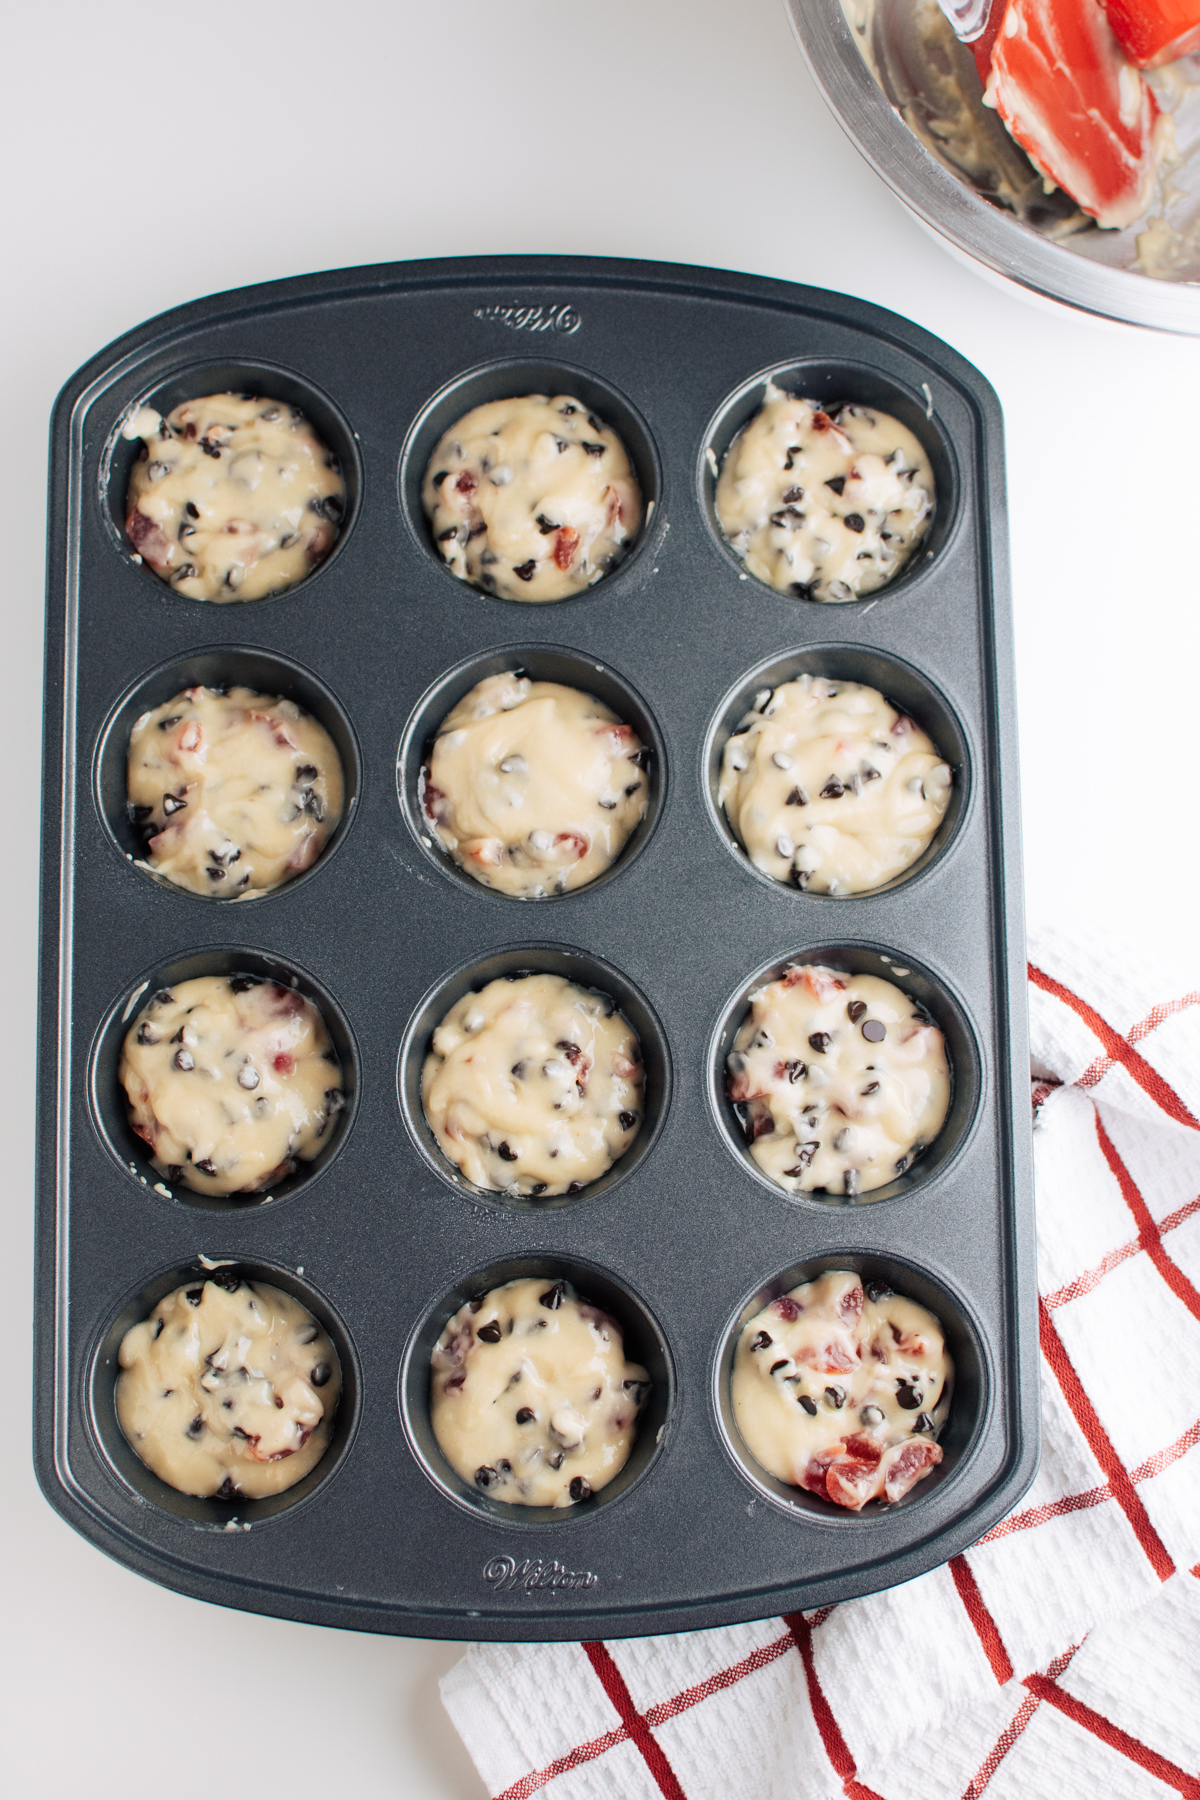 Cherry chip muffin batter in muffin tin next to red and white kitchen towel.